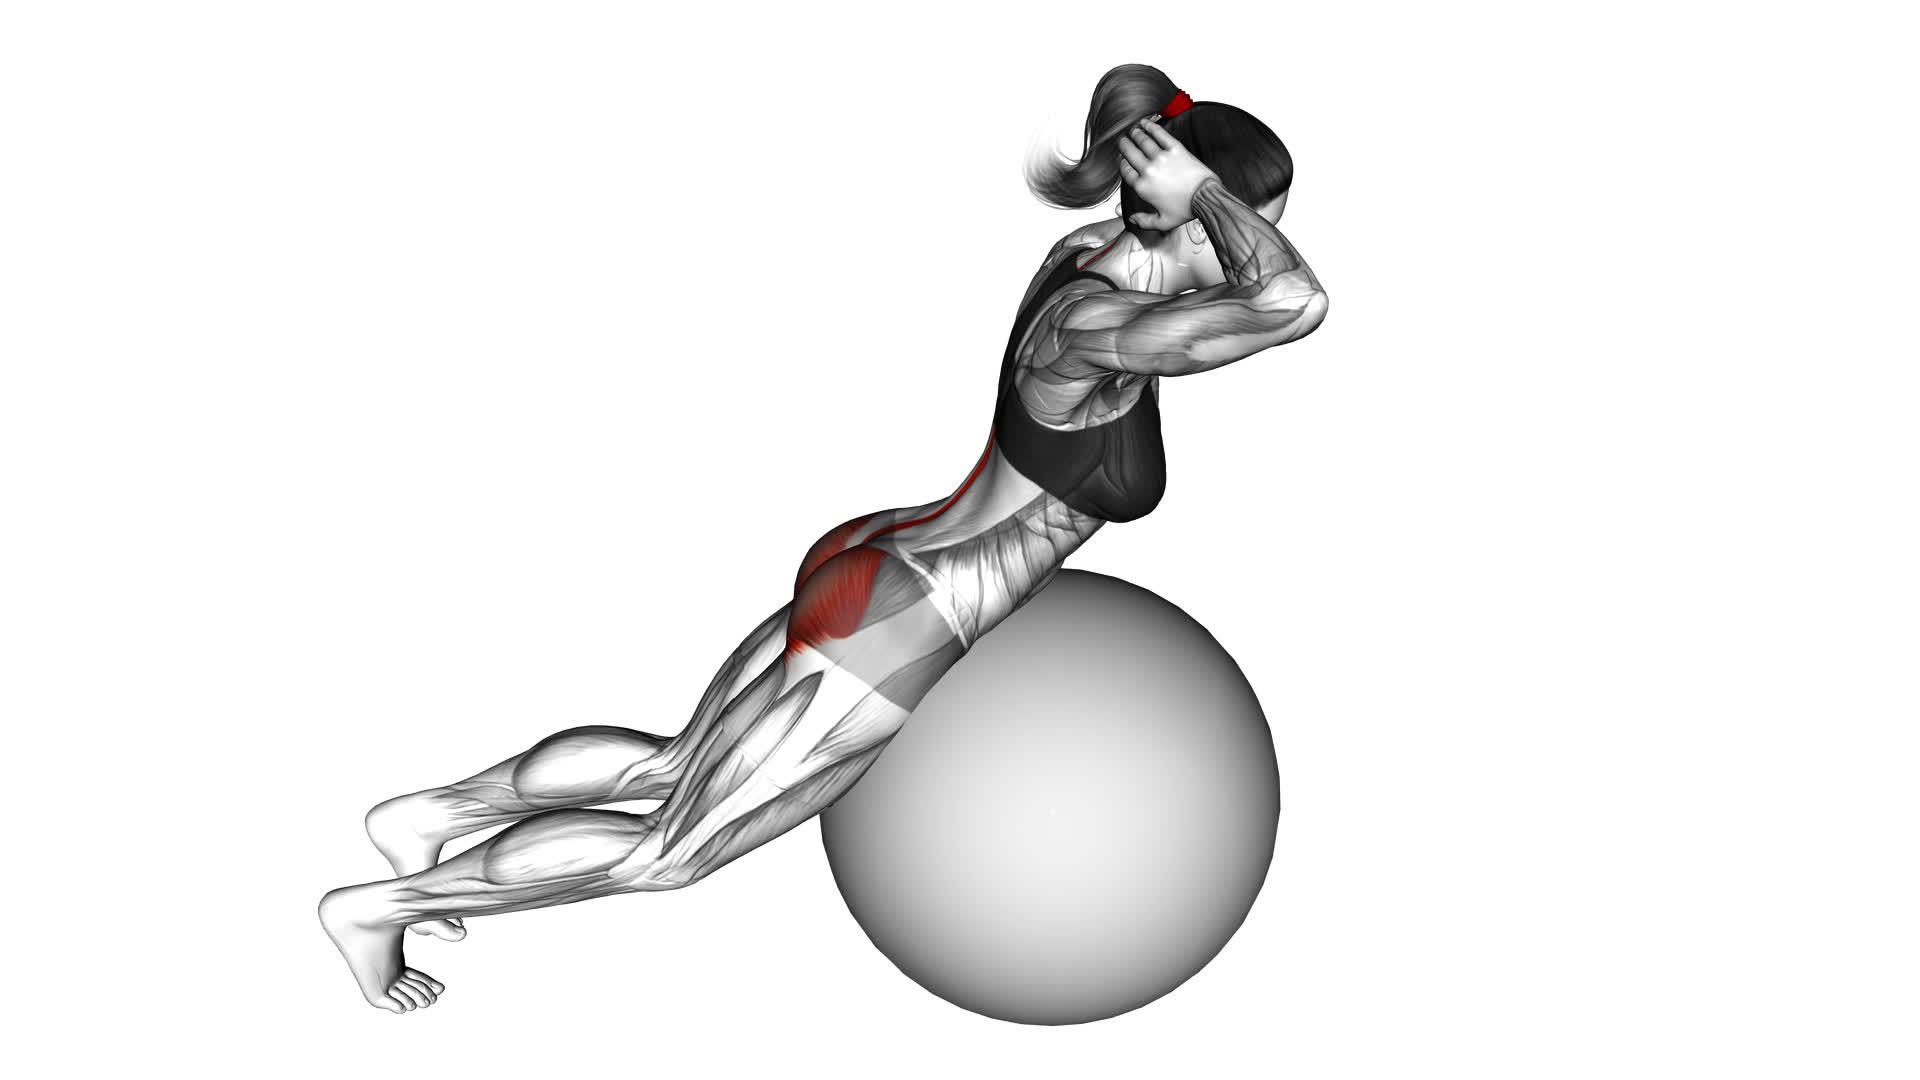 Exercise Ball Back Extension With Hands Behind Head (female) - Video Exercise Guide & Tips